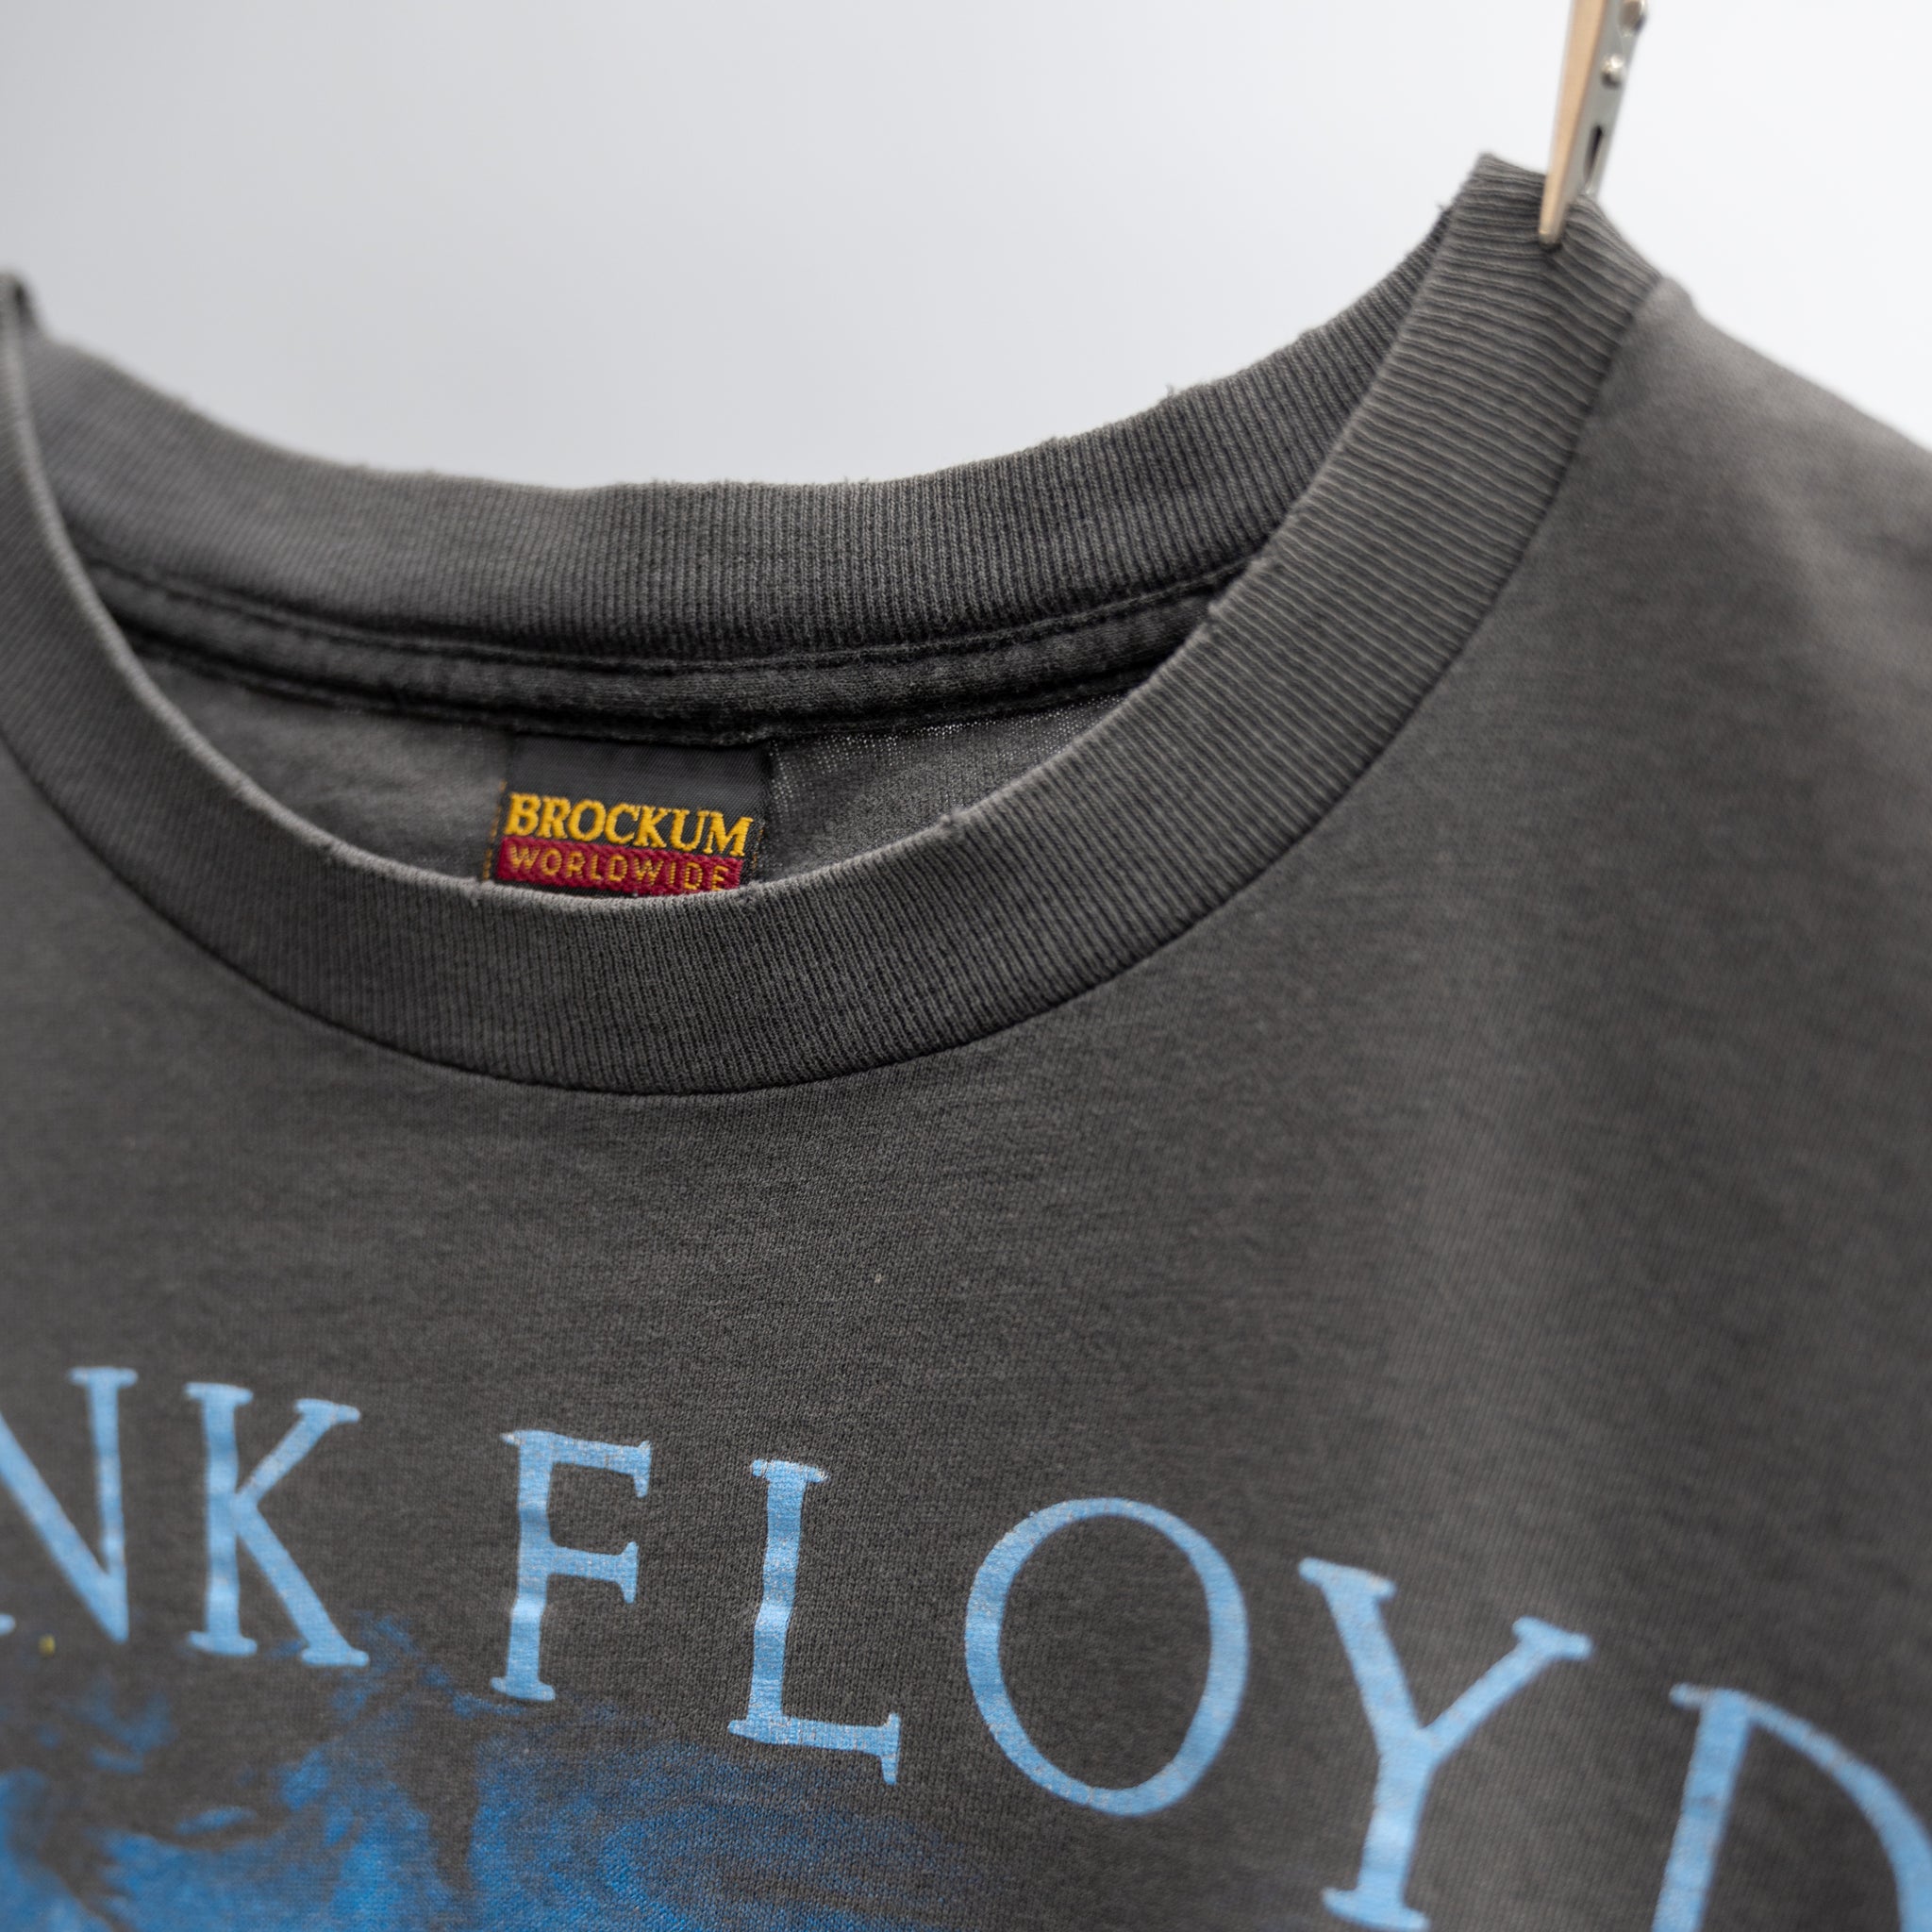 FADED SINGLE STITCH PINK FLOYD 'WISH YOU WERE HERE' TEE - 1990'S